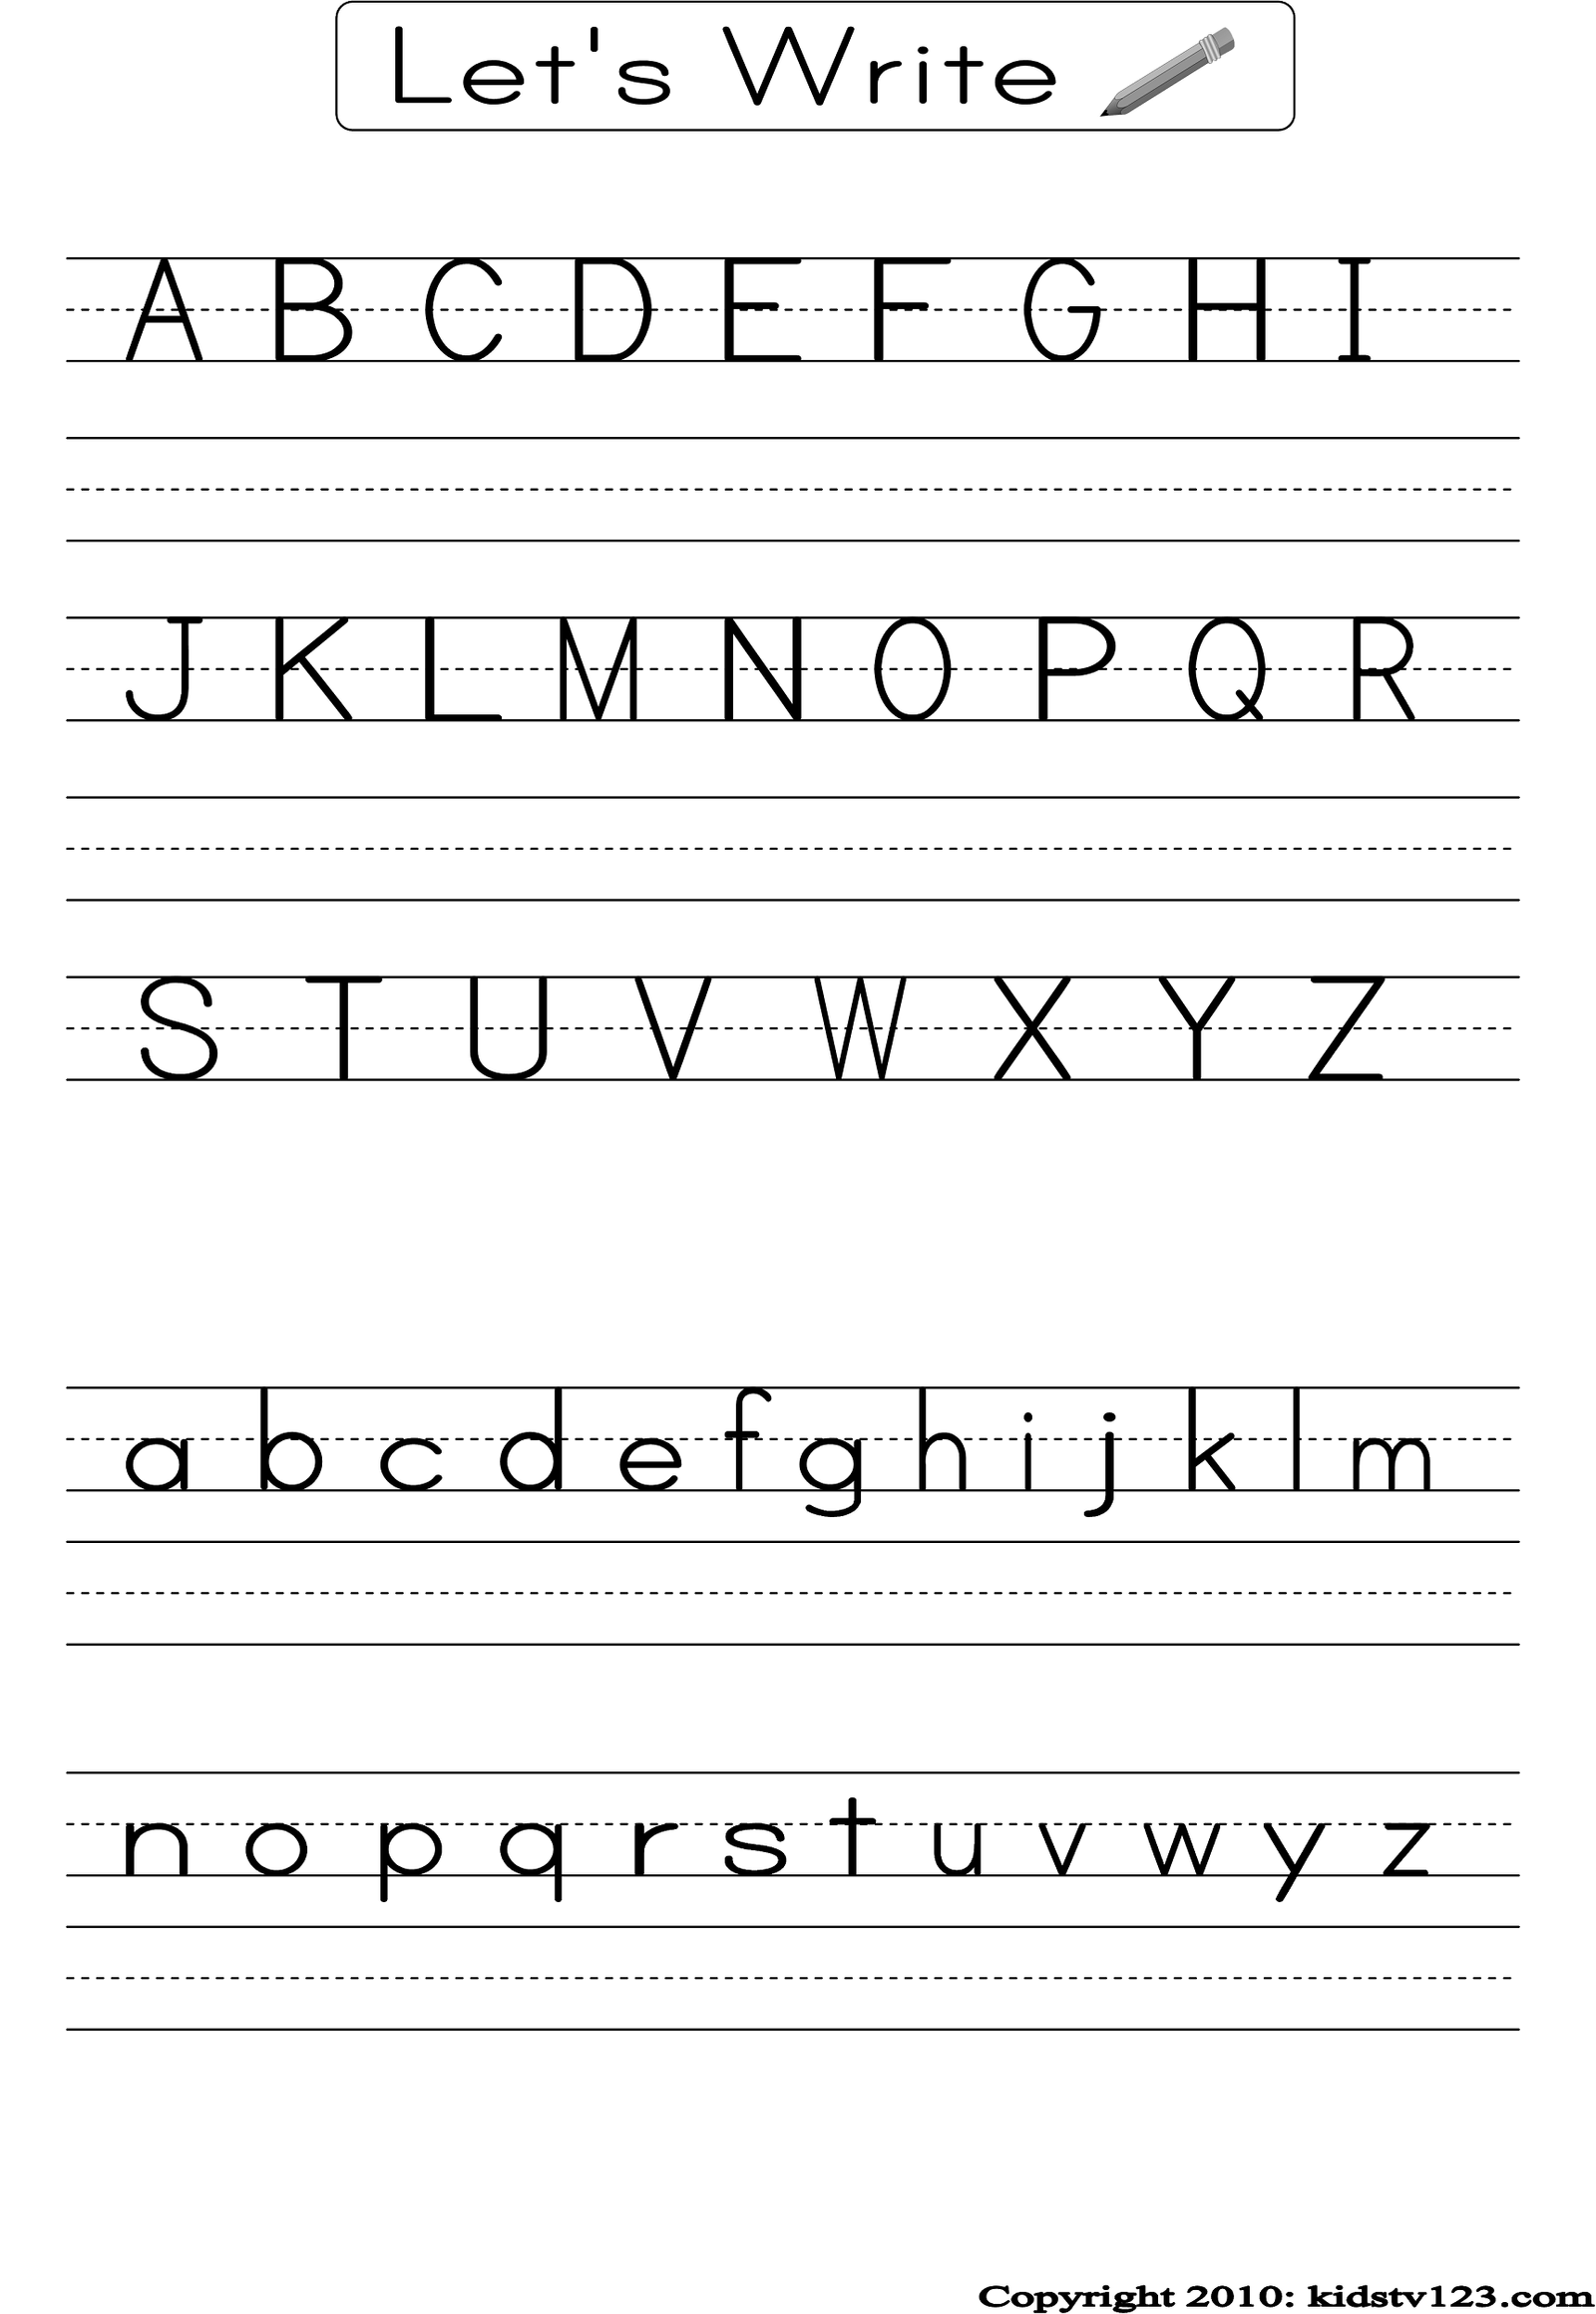 Alphabet Practice Worksheets to Print | Activity Shelter